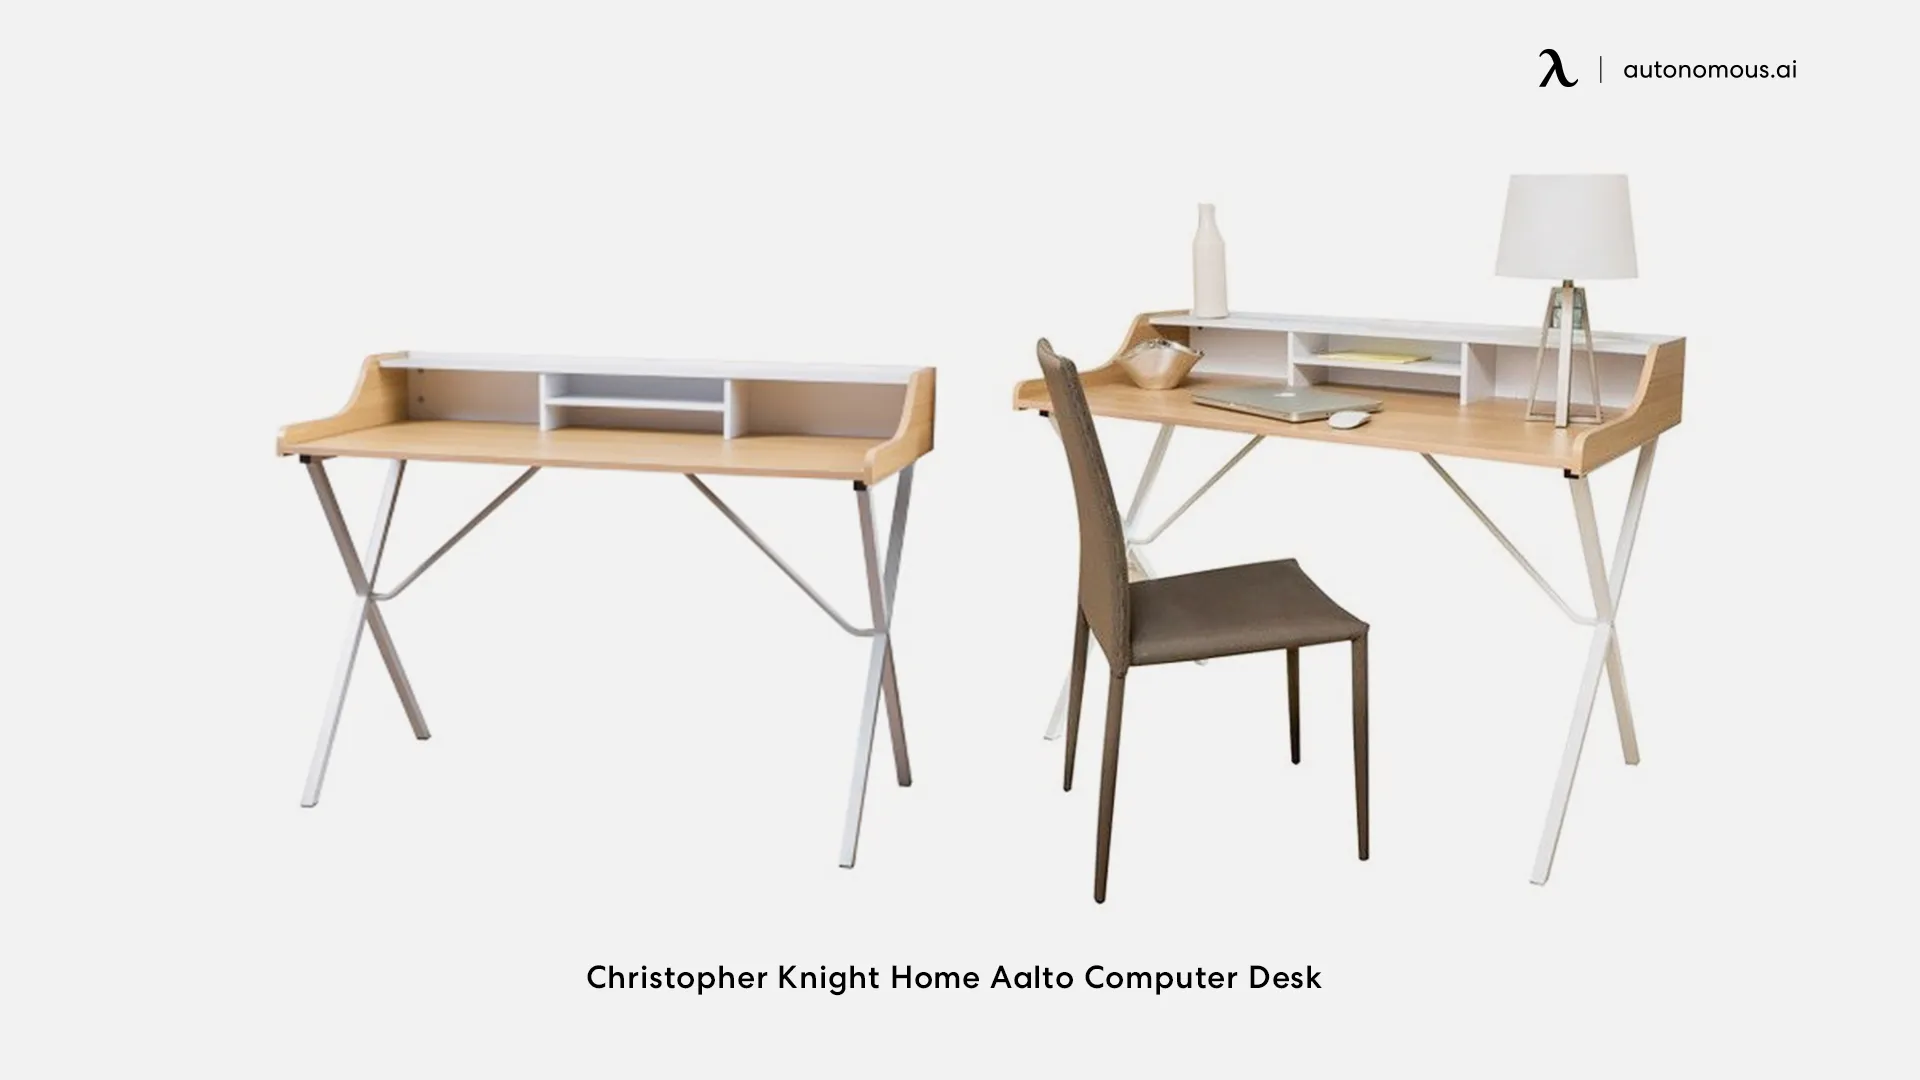 Christopher Knight Home Aalto Computer Desk